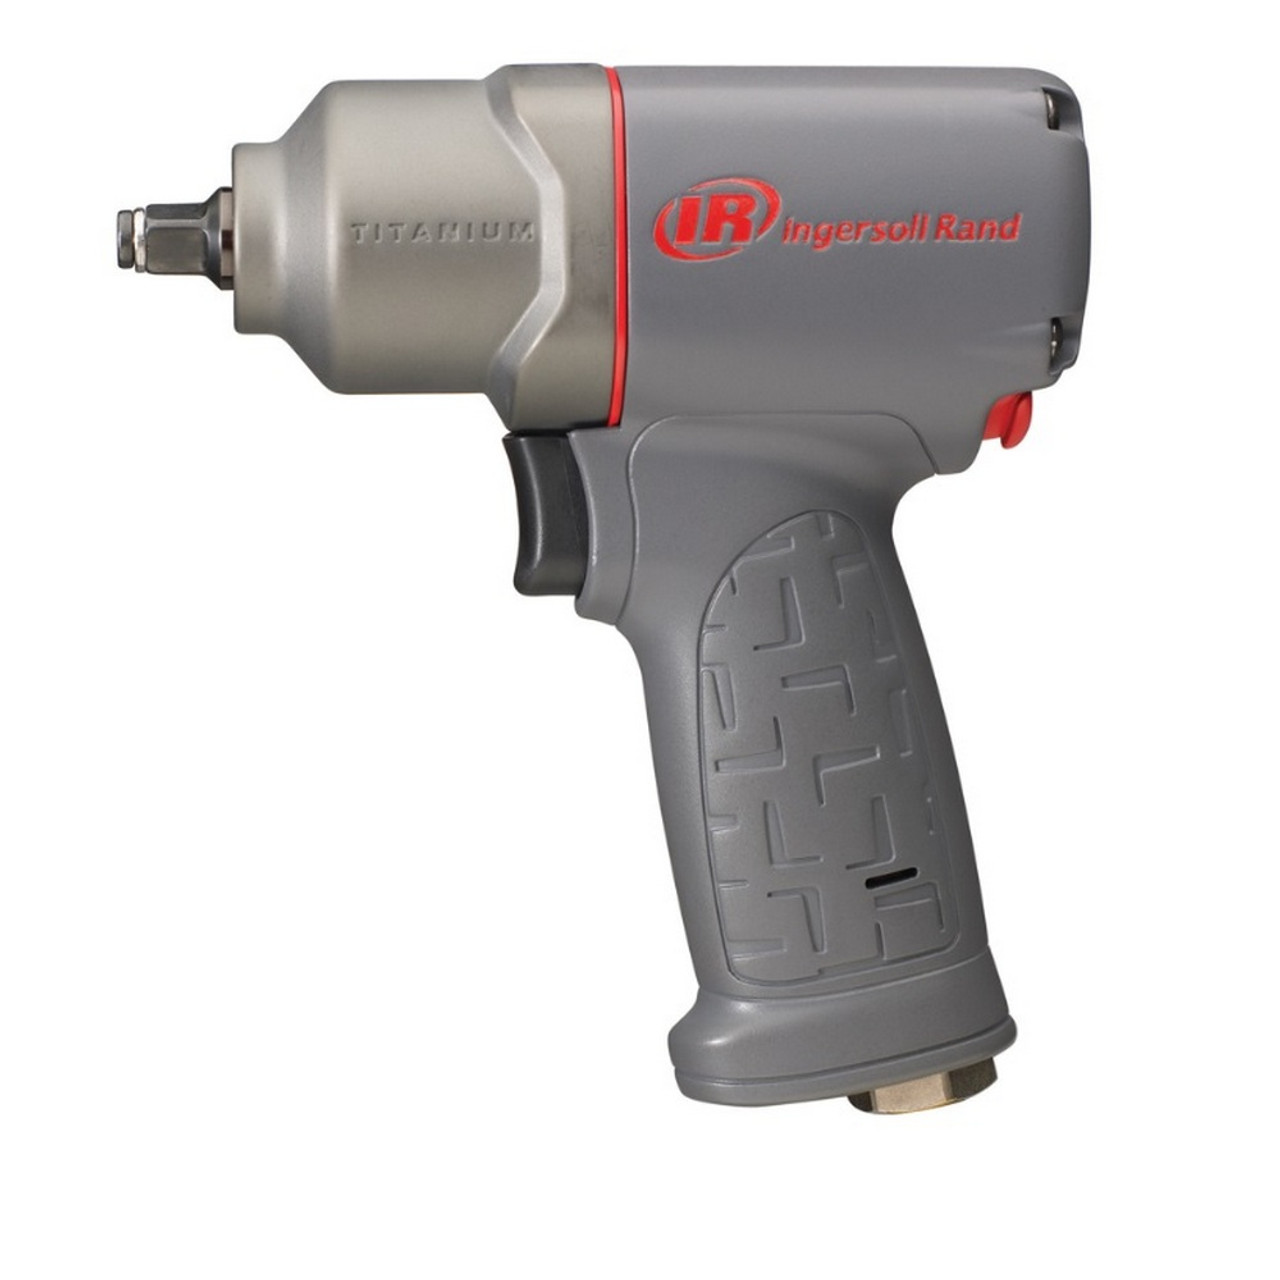 Ingersoll Rand 2115QTIMAX: 3/8" Impact Wrench